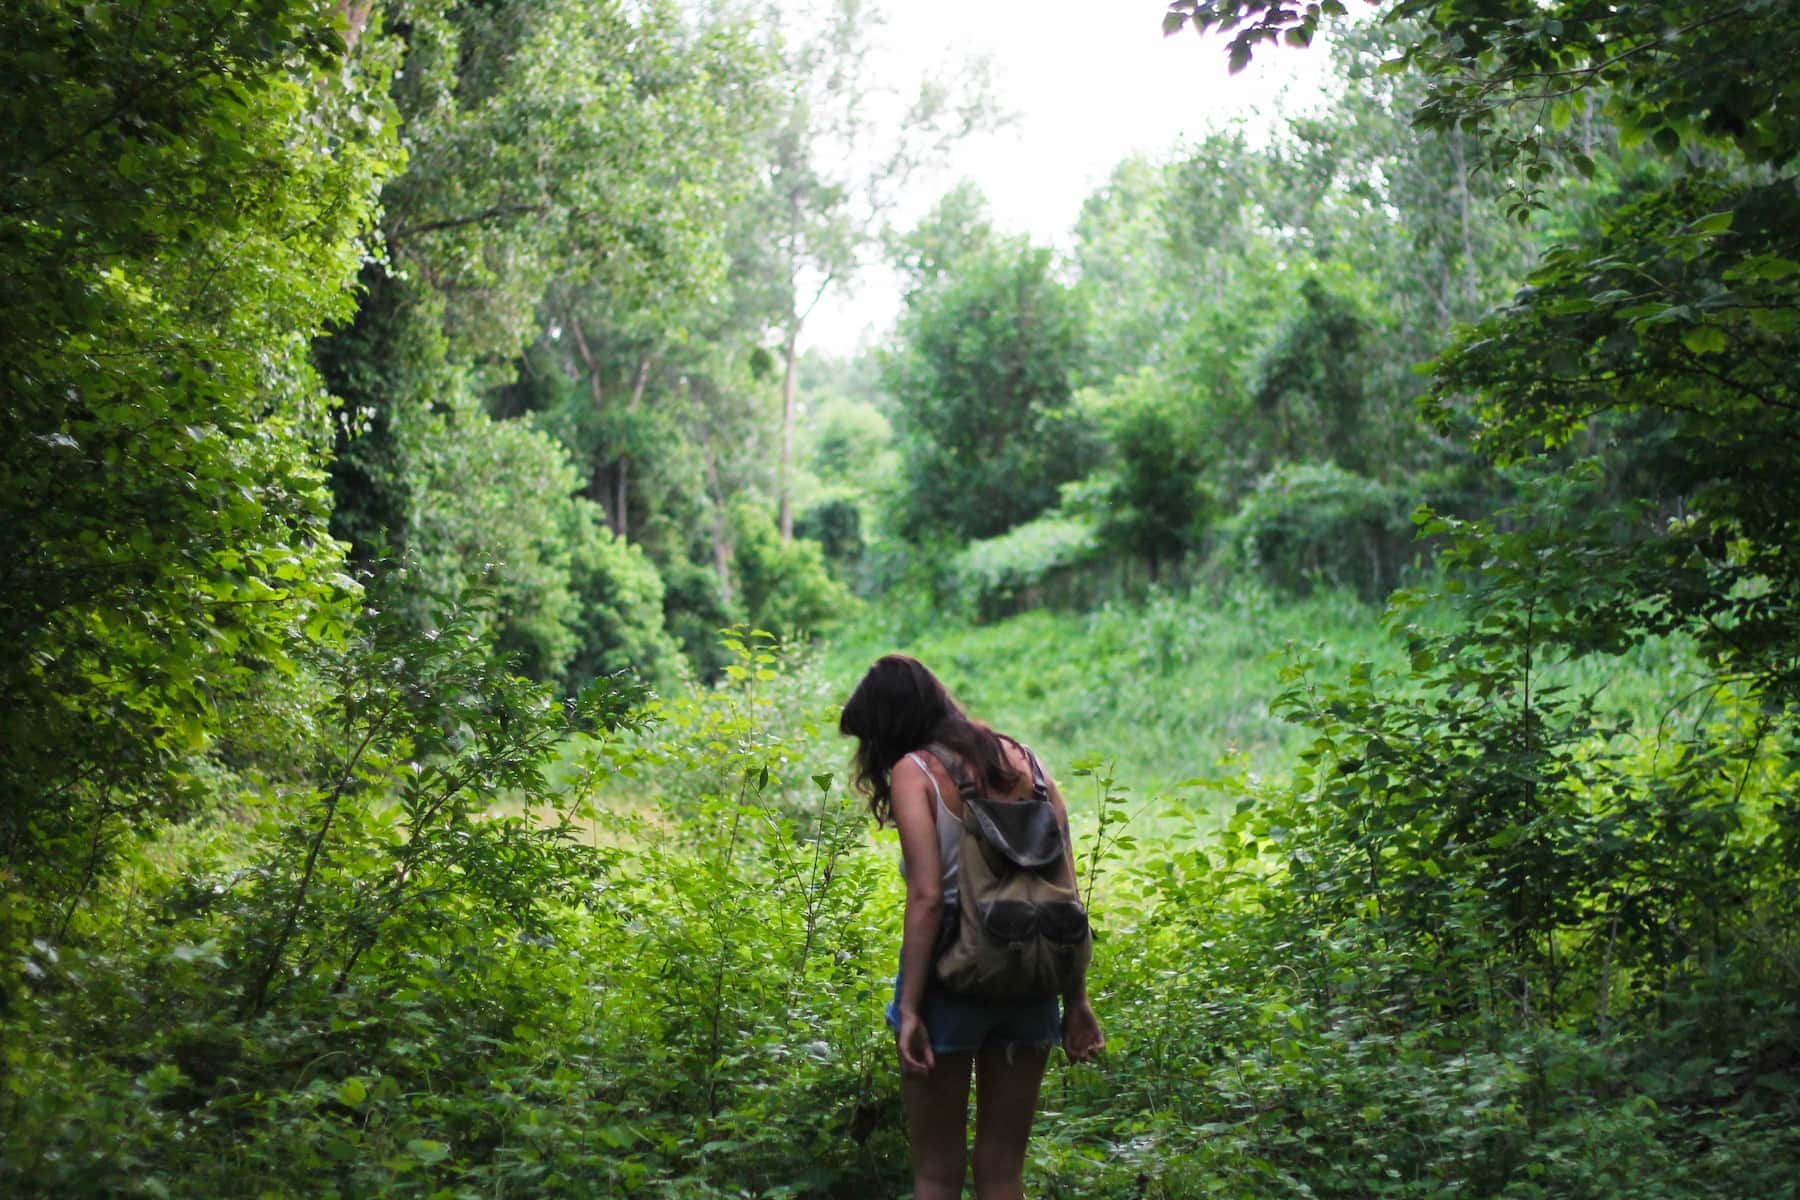 Exploring the outdoors. Photo by Michelle Spencer, Unsplash